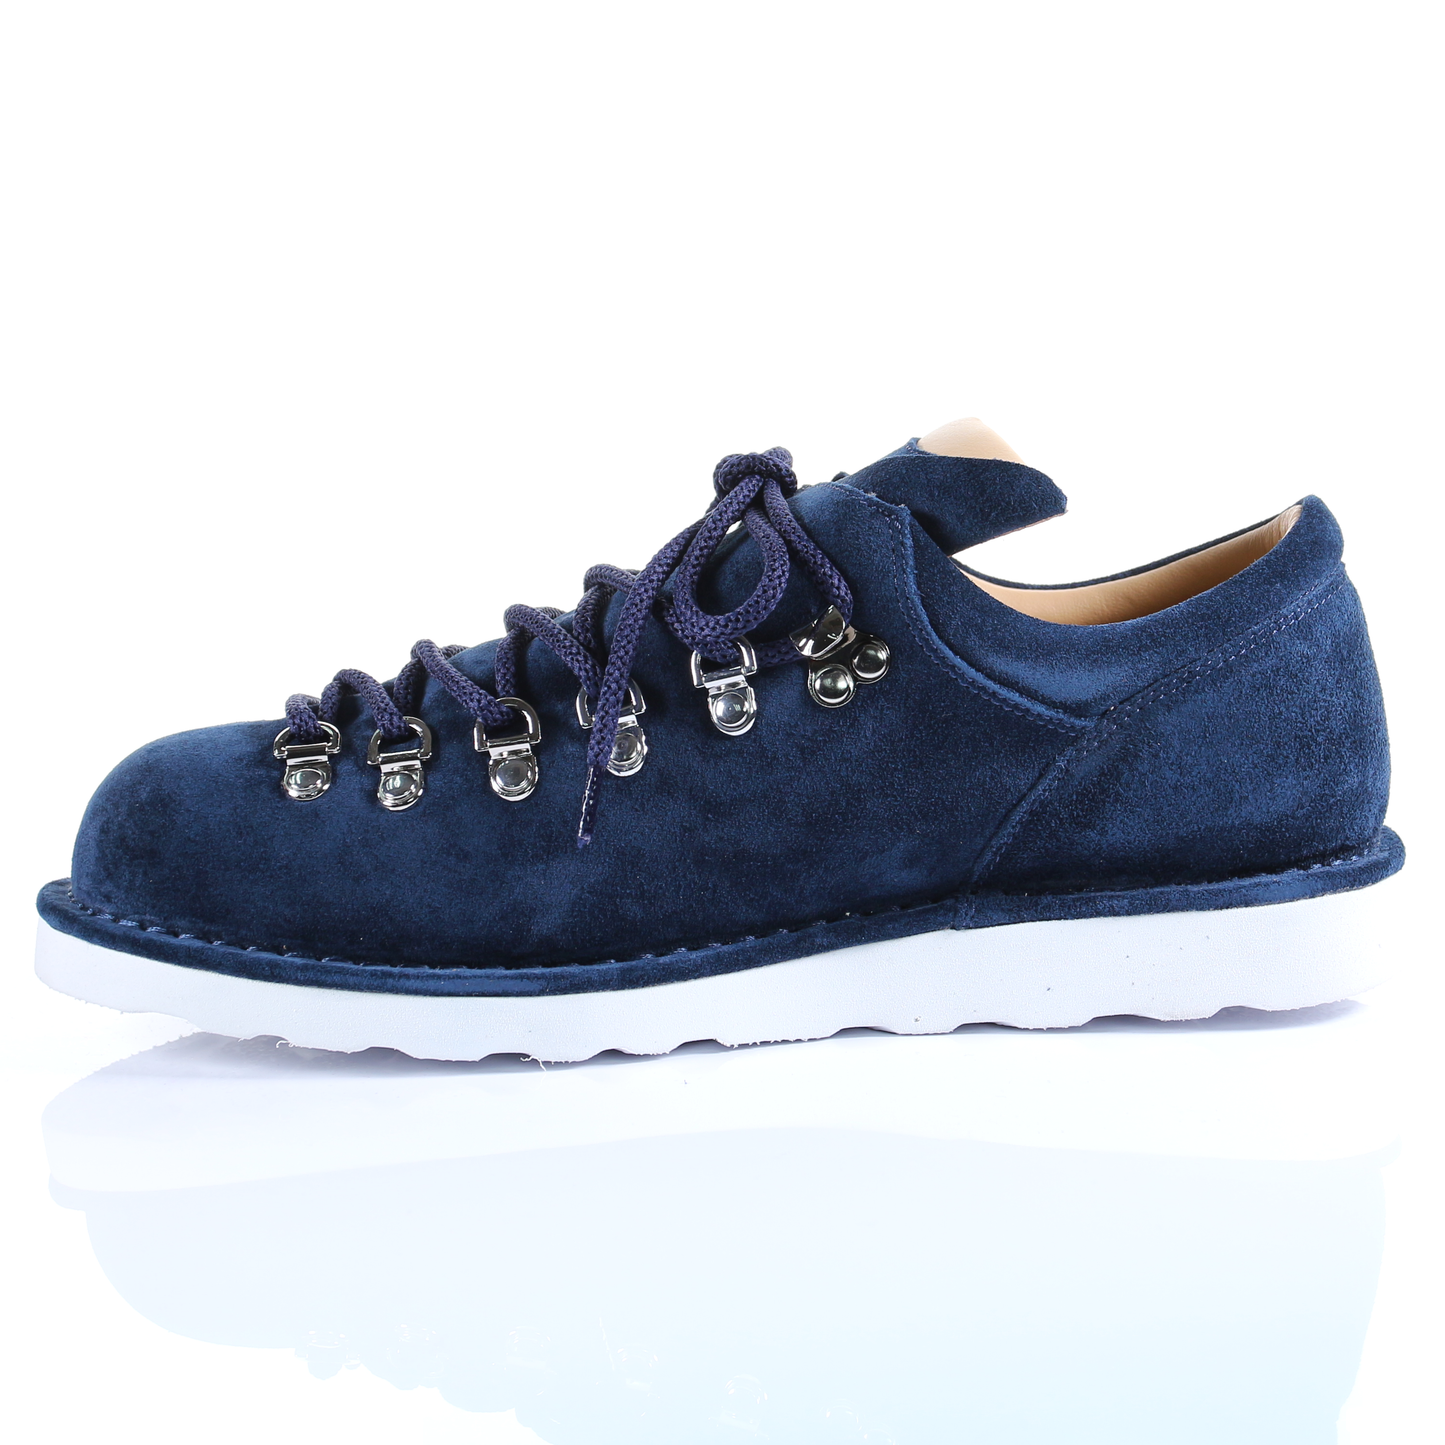 Men's Style Suede Mountain Shoes (Navy)